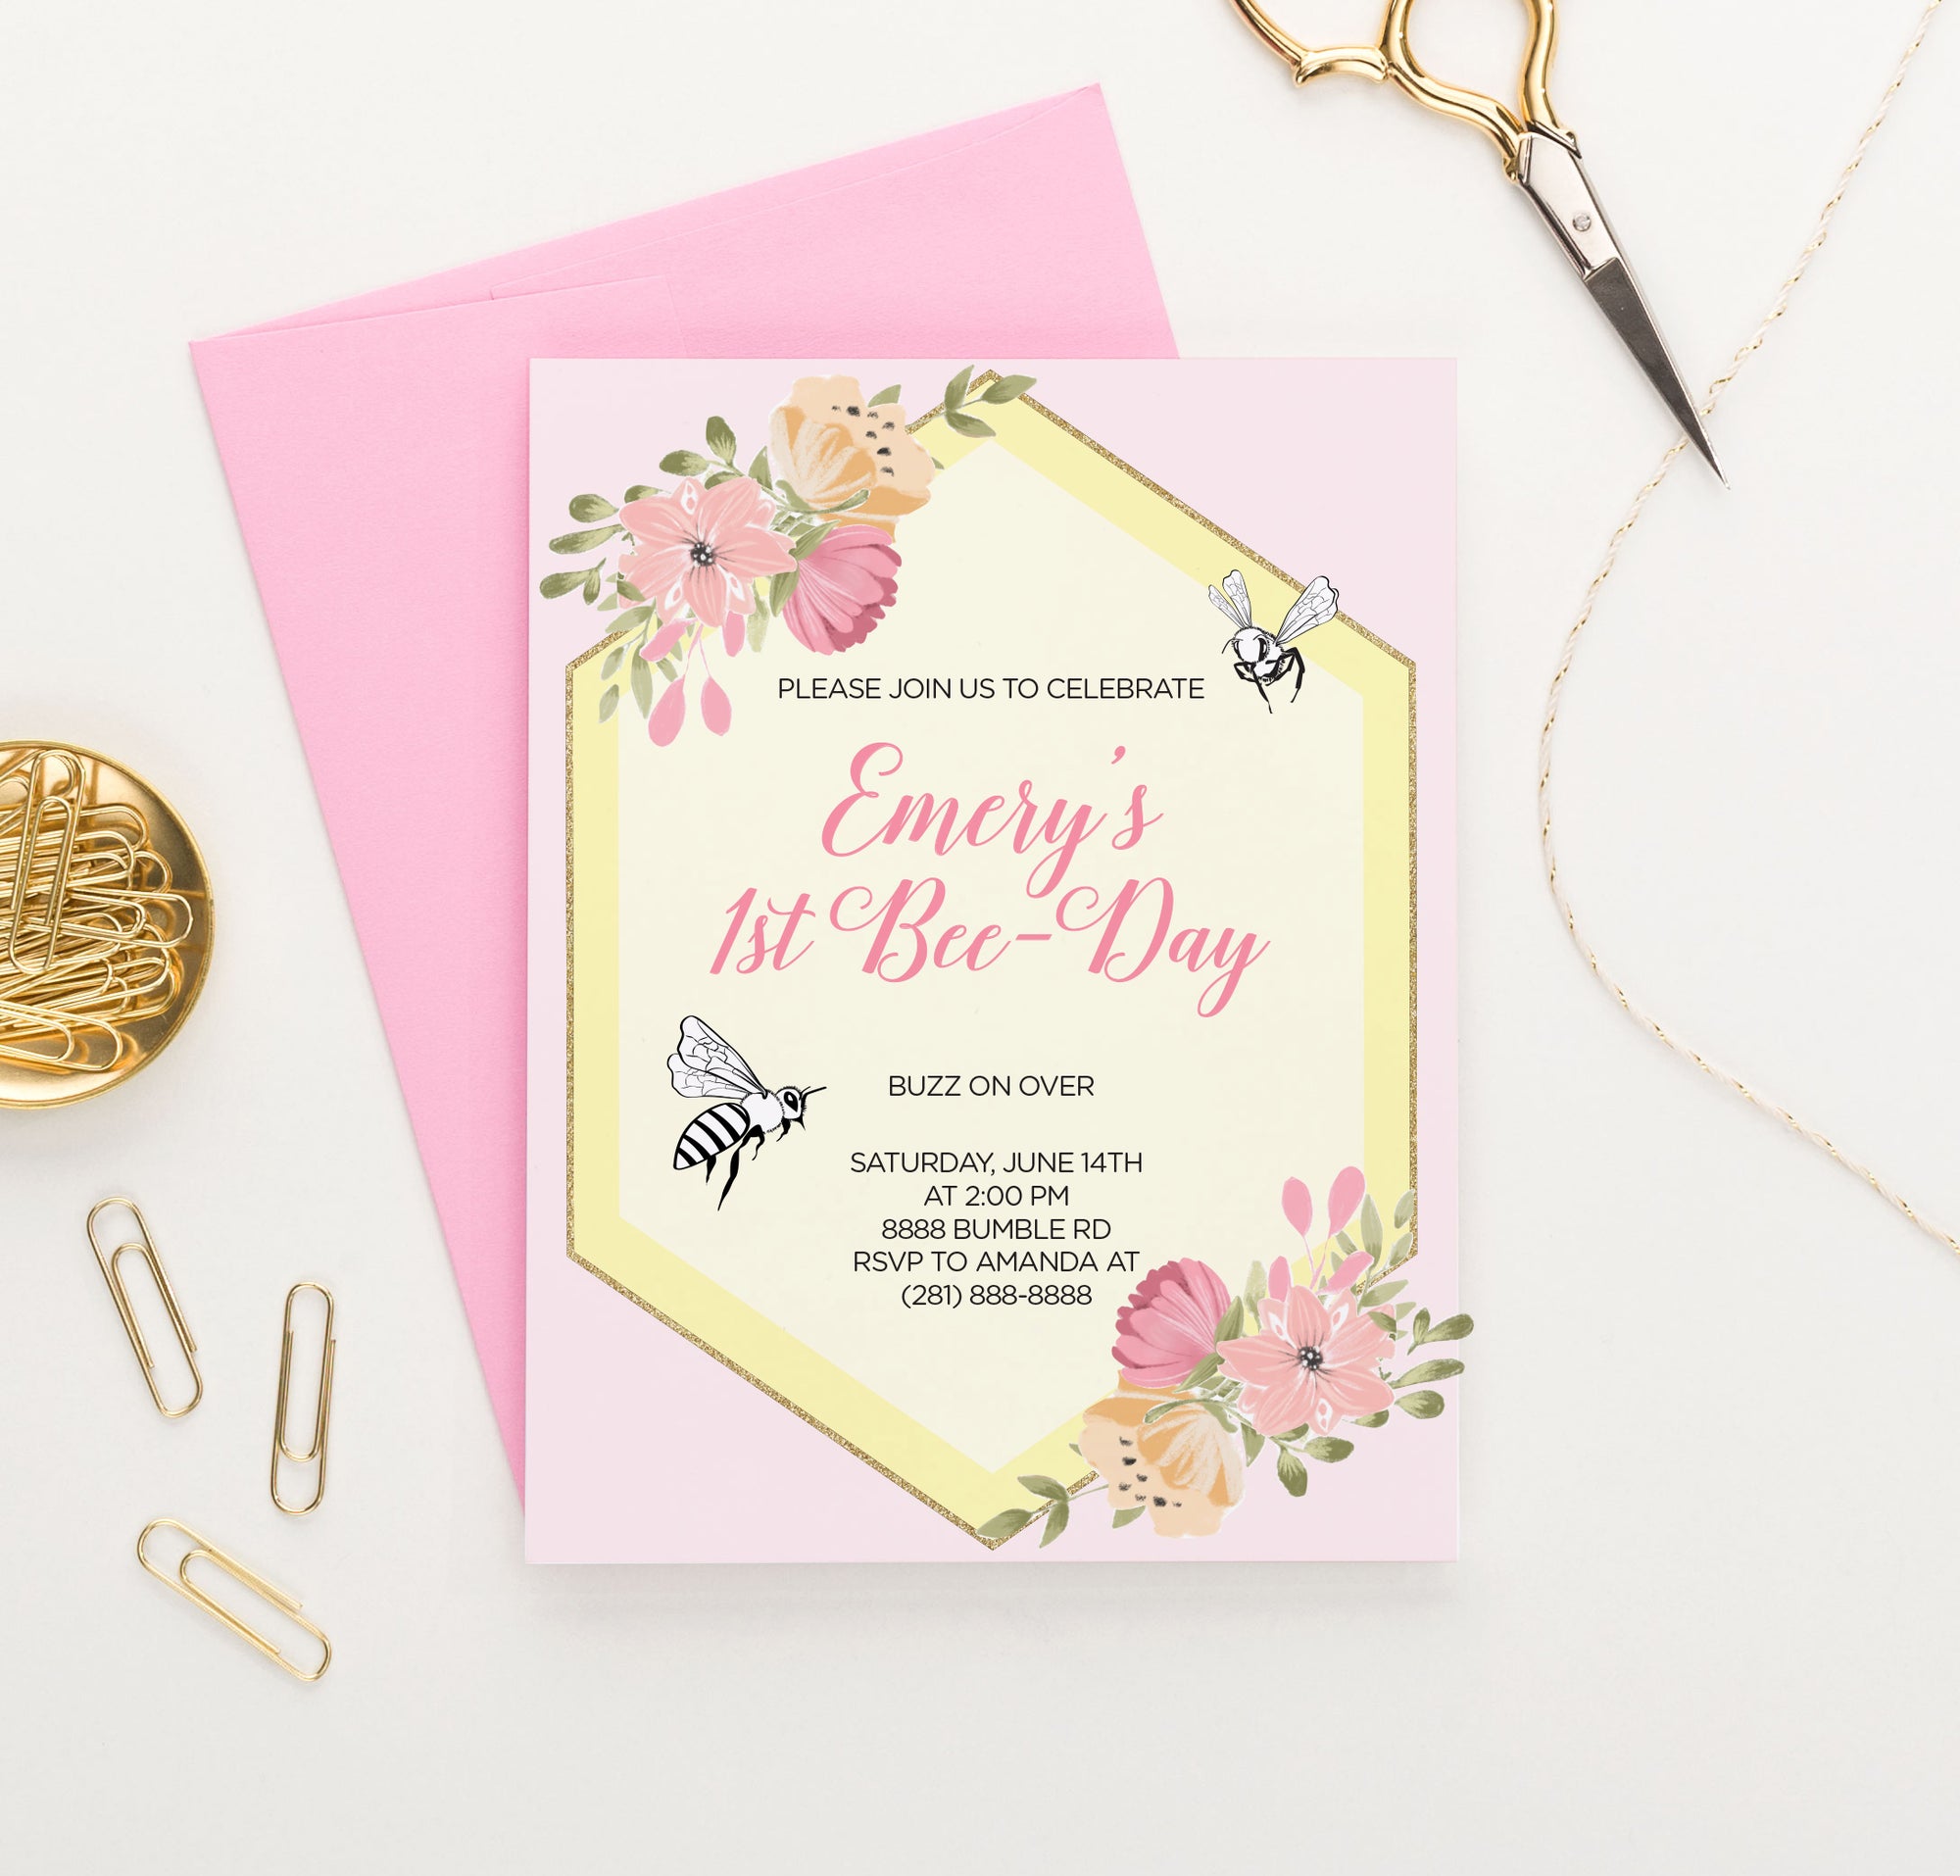 Personalized 1st Bee Day Invitations With Florals